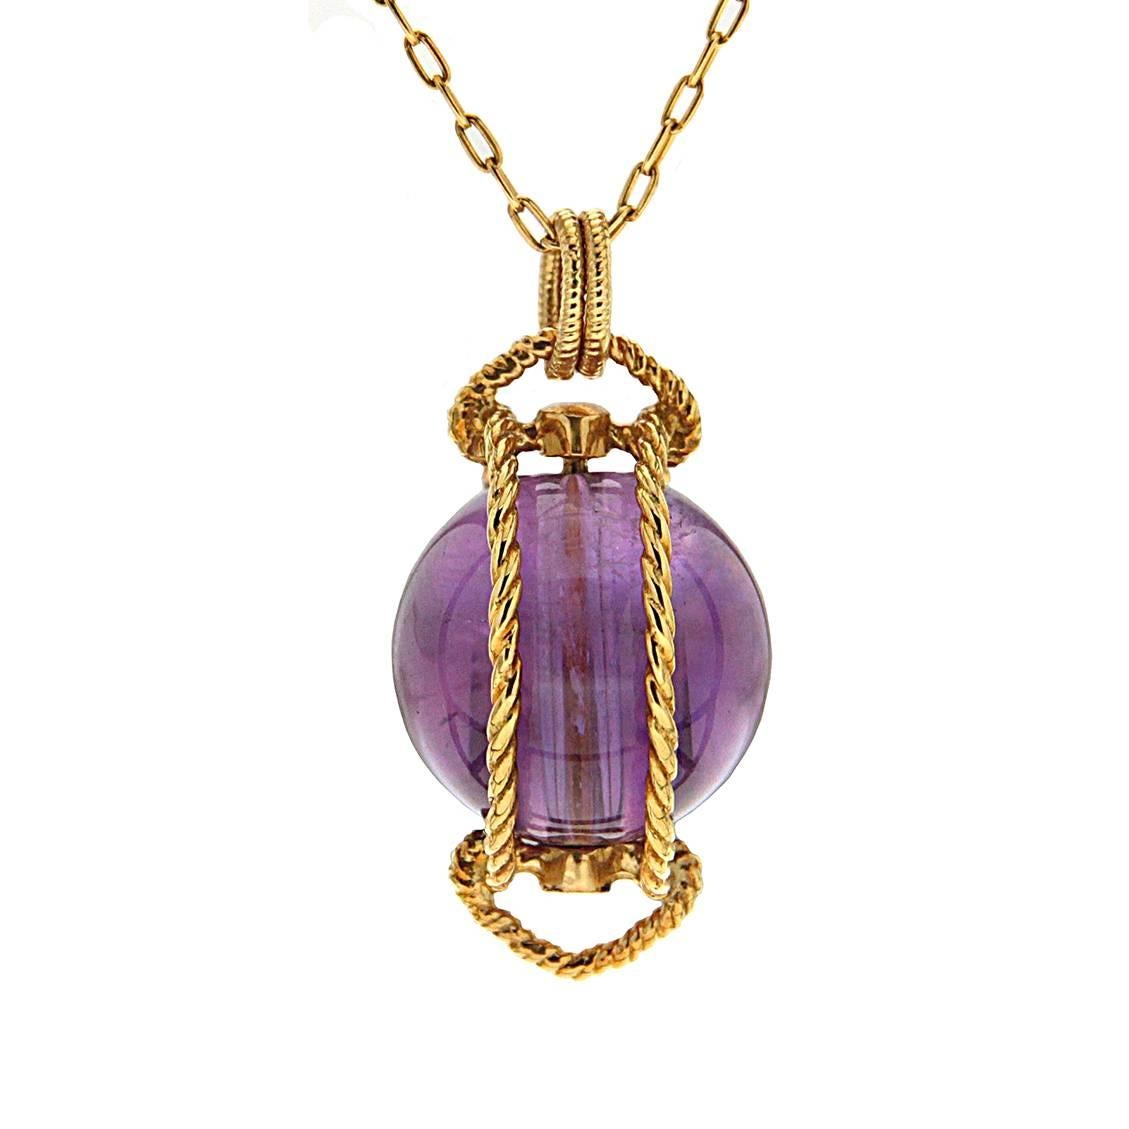 This lovely amethyst pendant (12.5mm) ball with a polished finish is wrapped around by 18kt gold rope wires. Light in weight and small in size. The chain is 18 inch (chain can be resize upon request).  